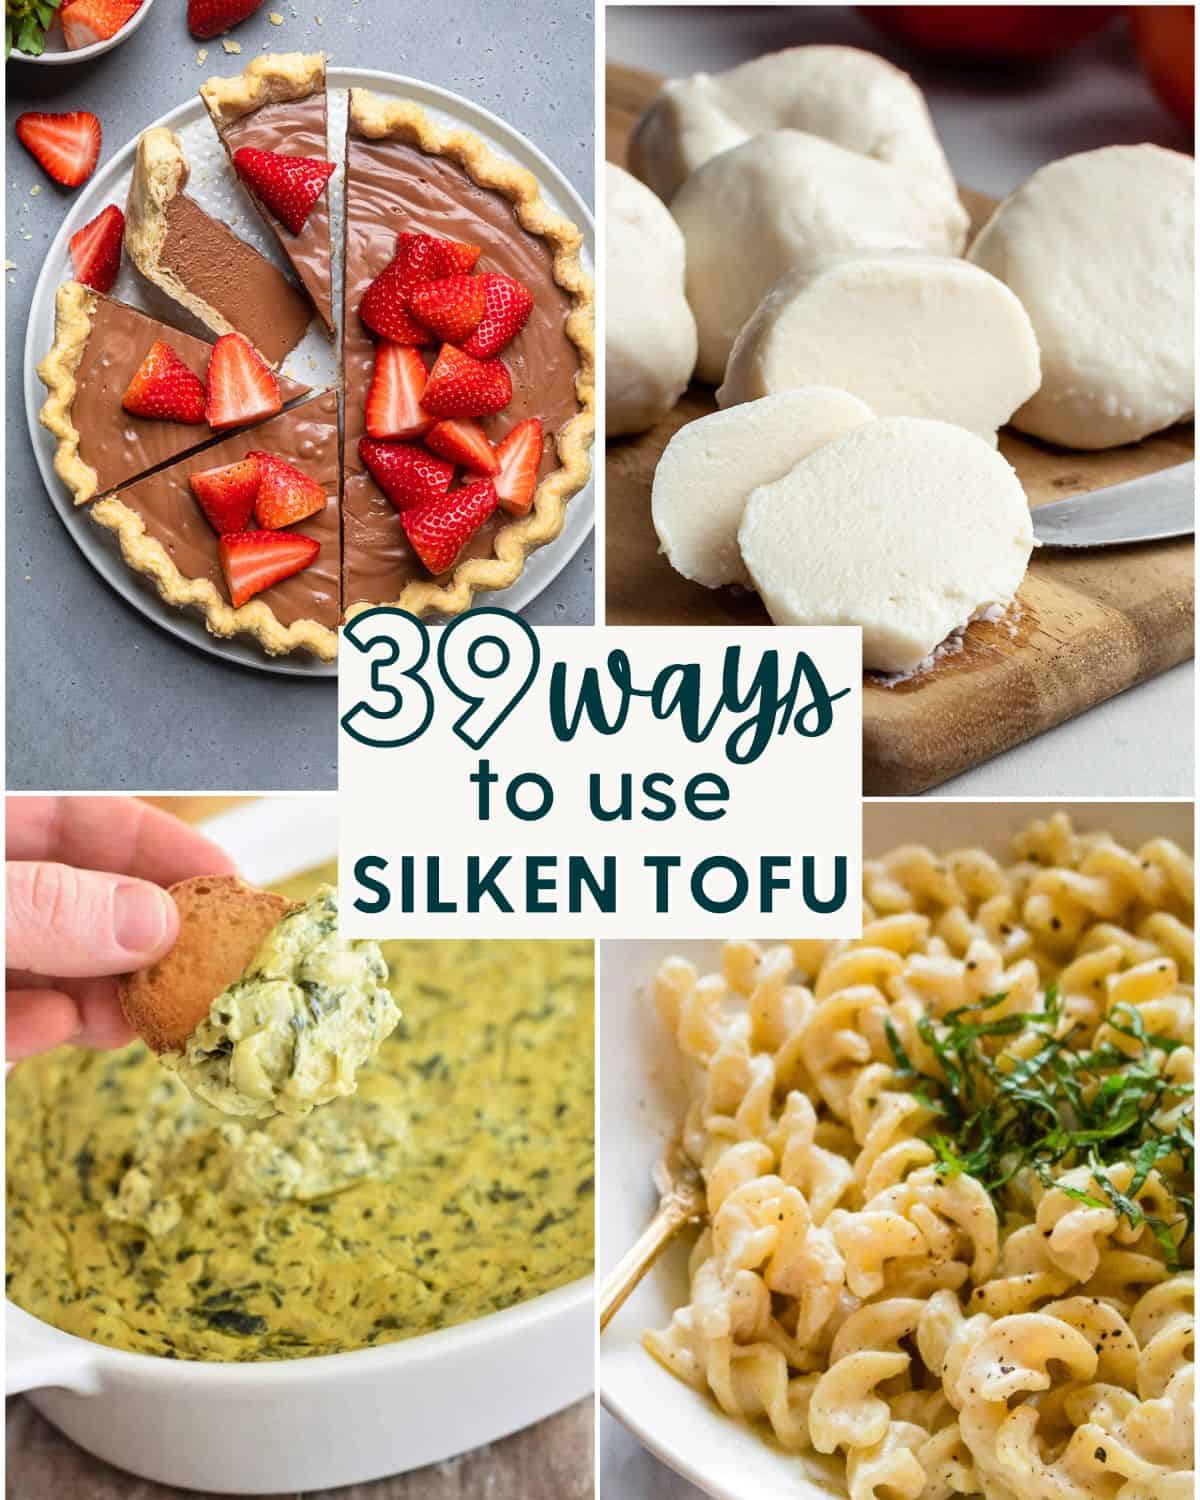 Collage of 4 Silken Tofu recipes with text that says "39 Ways to Use Silken Tofu."